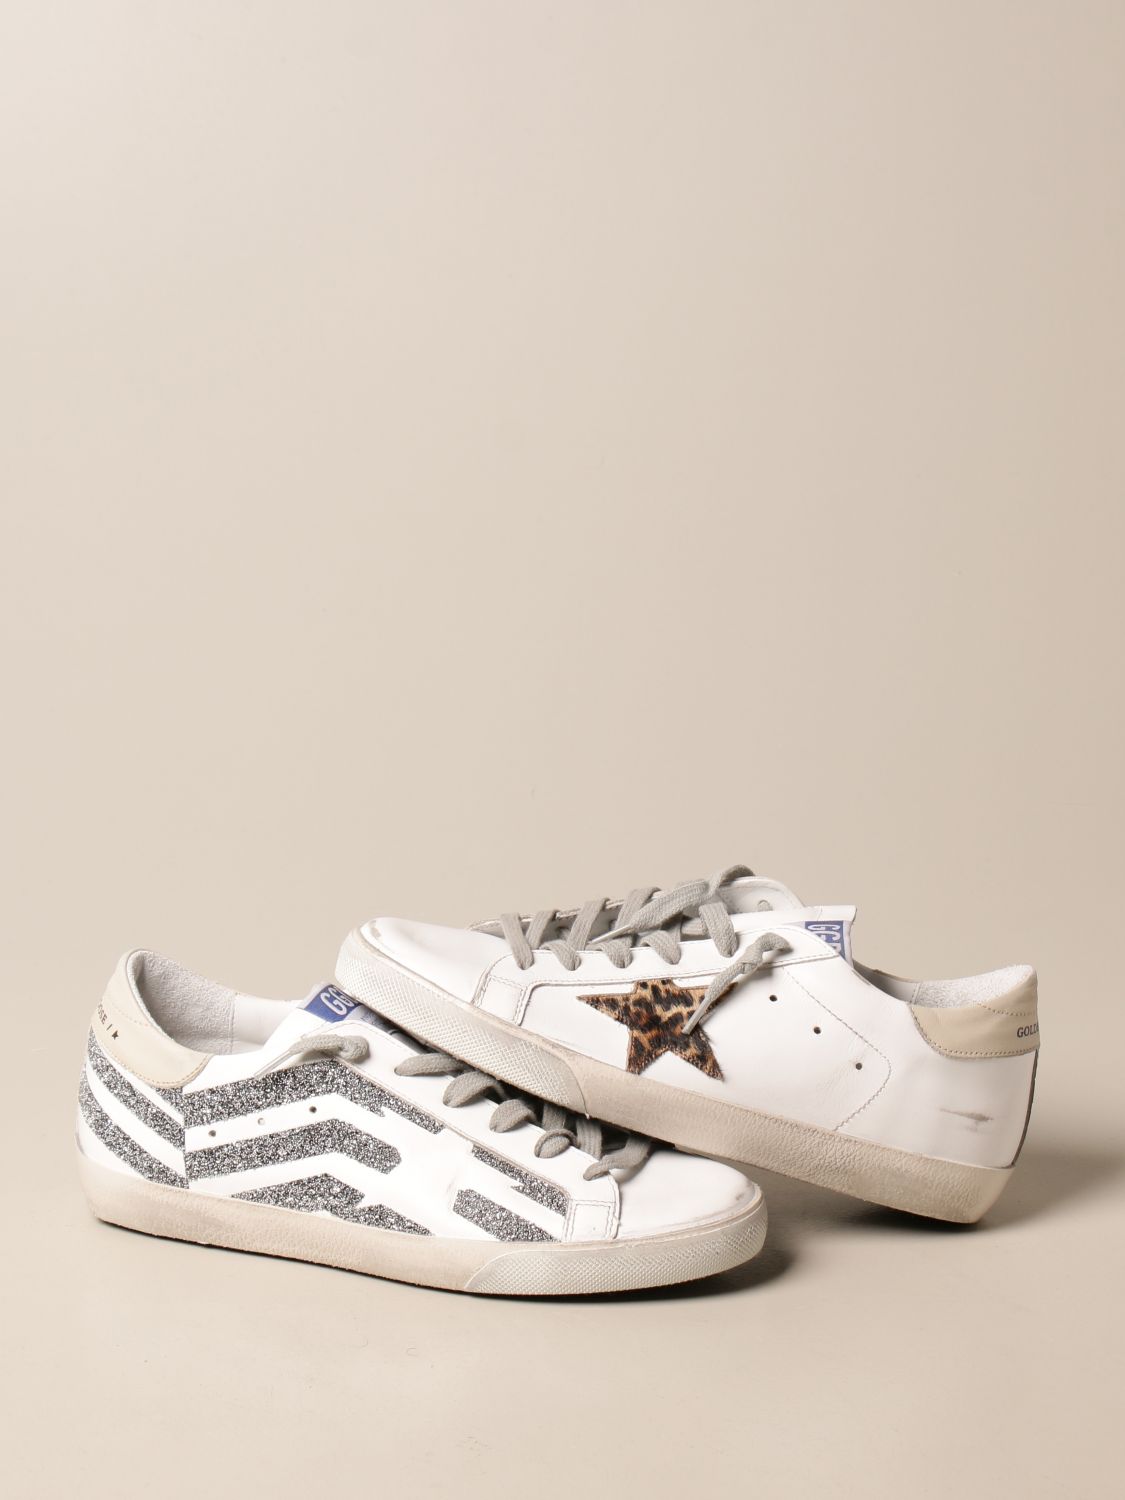 GOLDEN GOOSE Superstar flag sneakers in leather with Swarovski